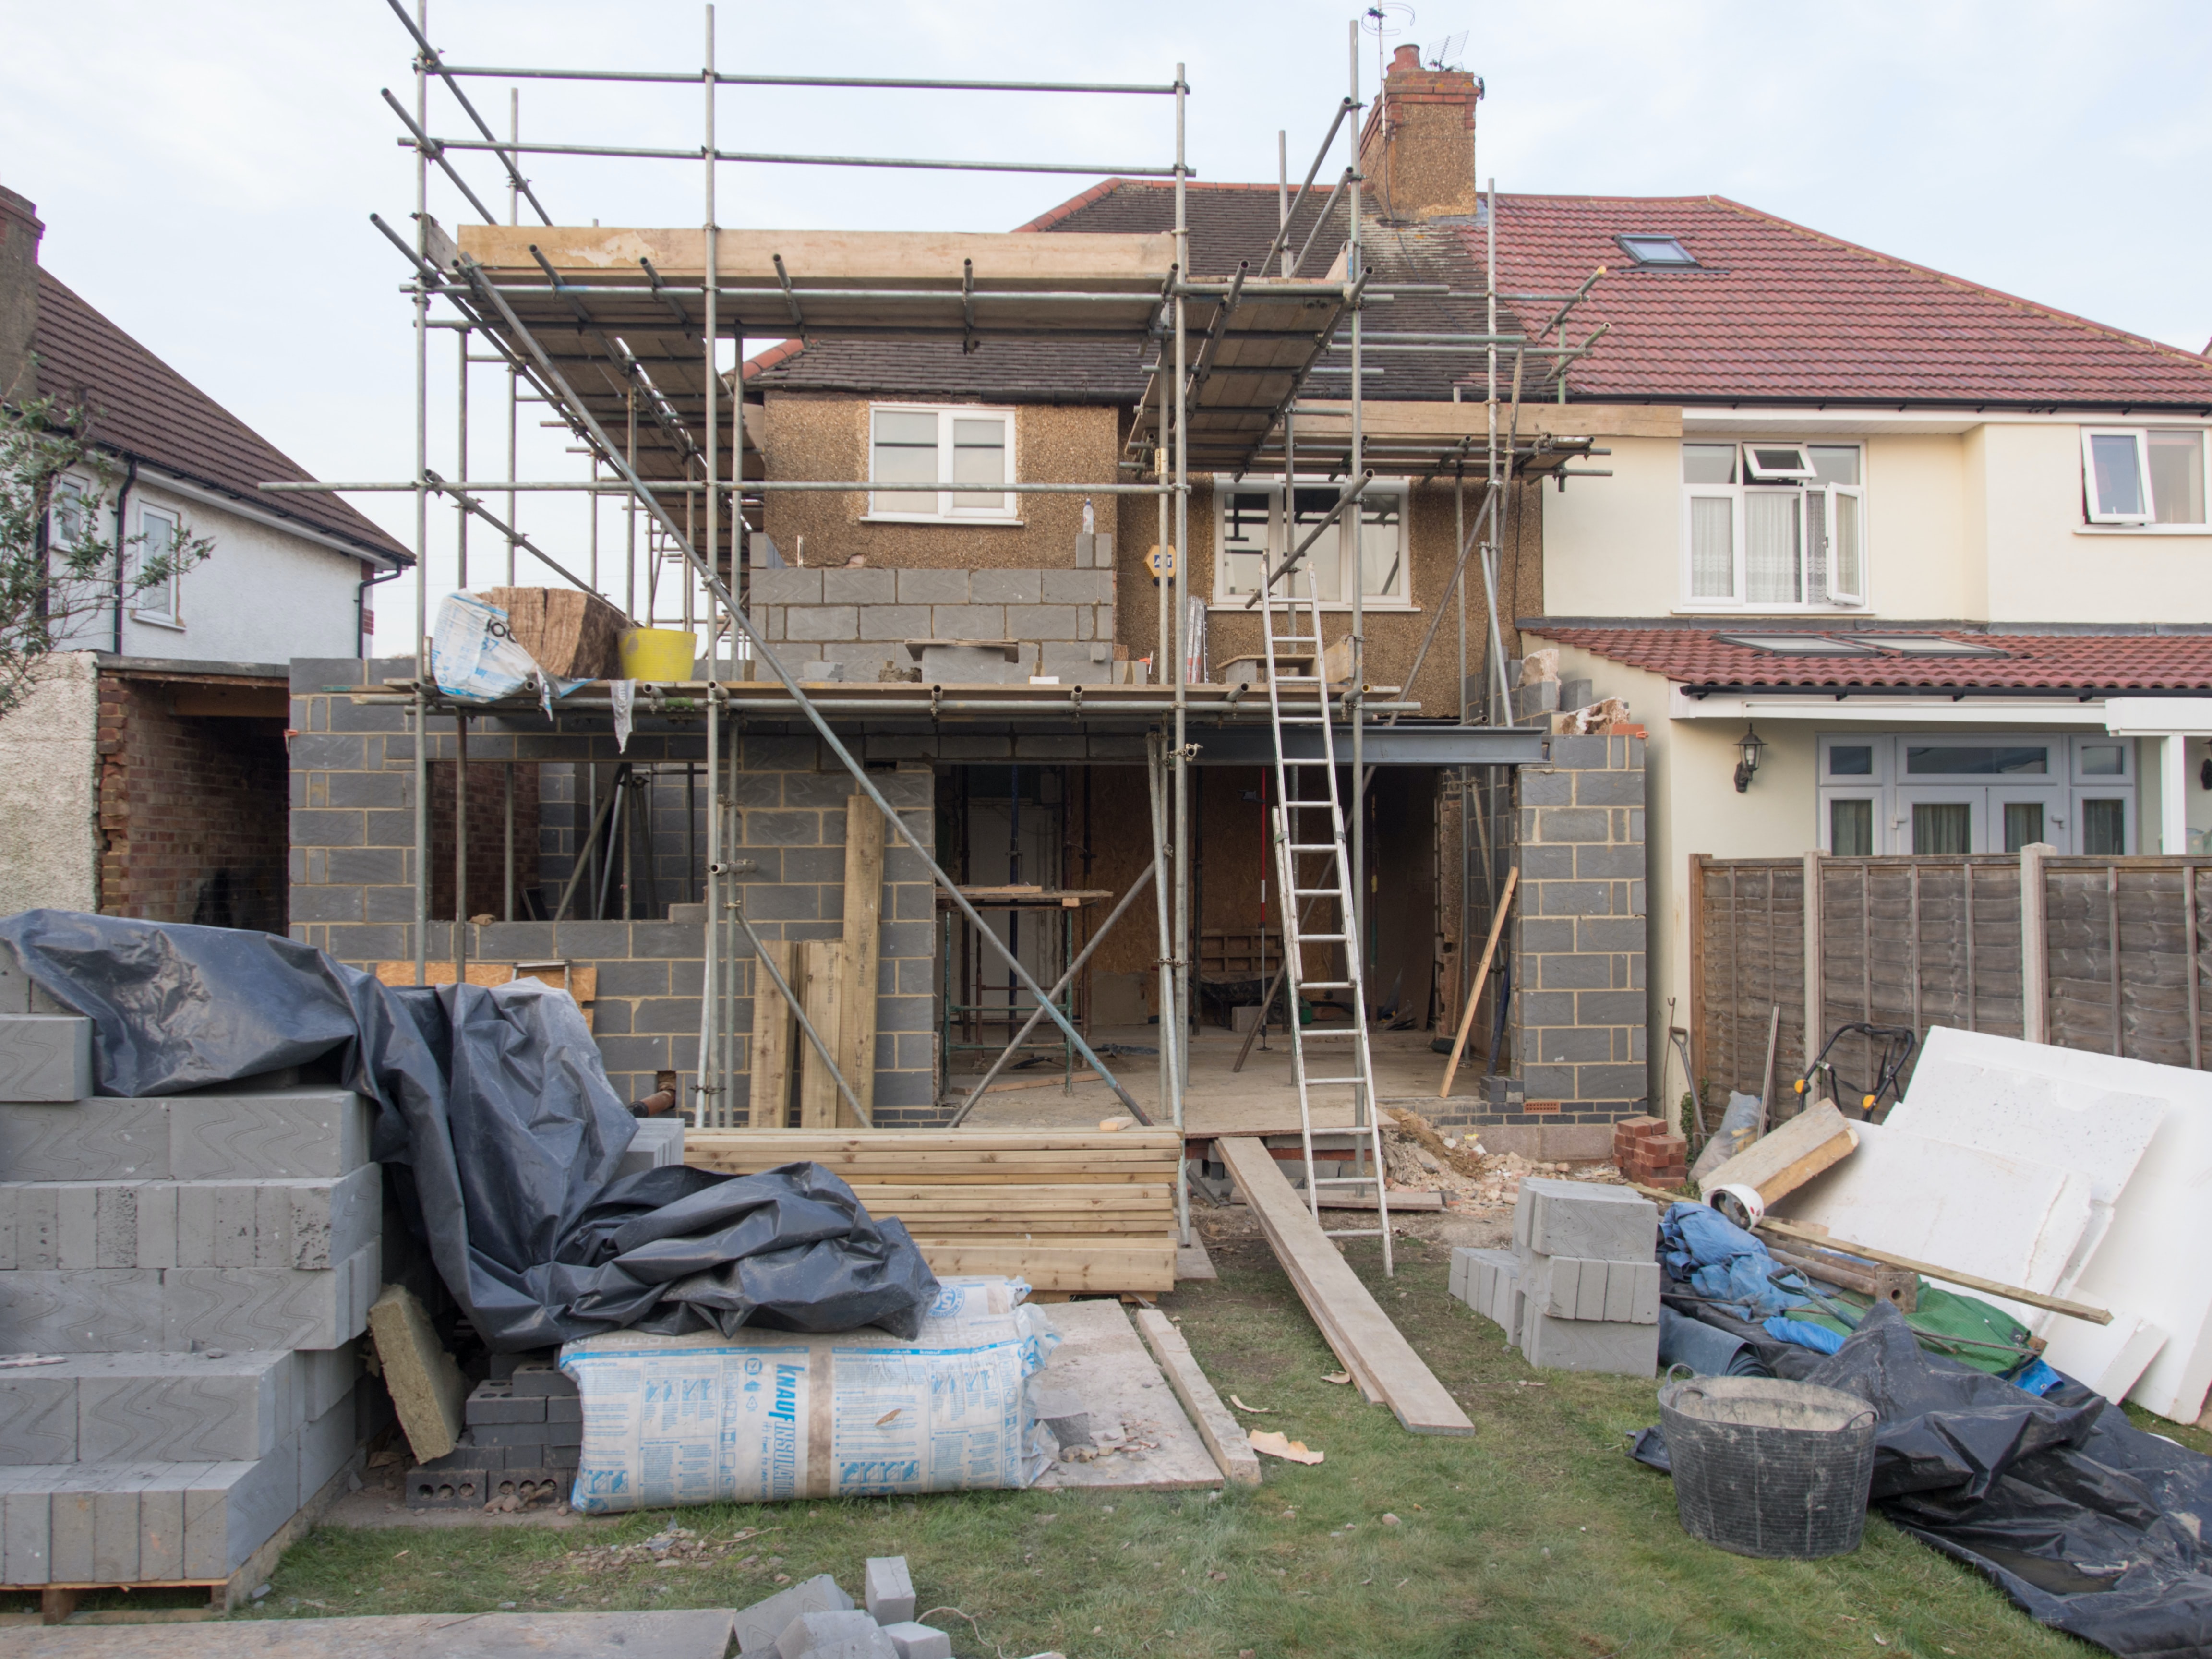 Top 10 Easiest & Hardest Places to Get Planning Permission